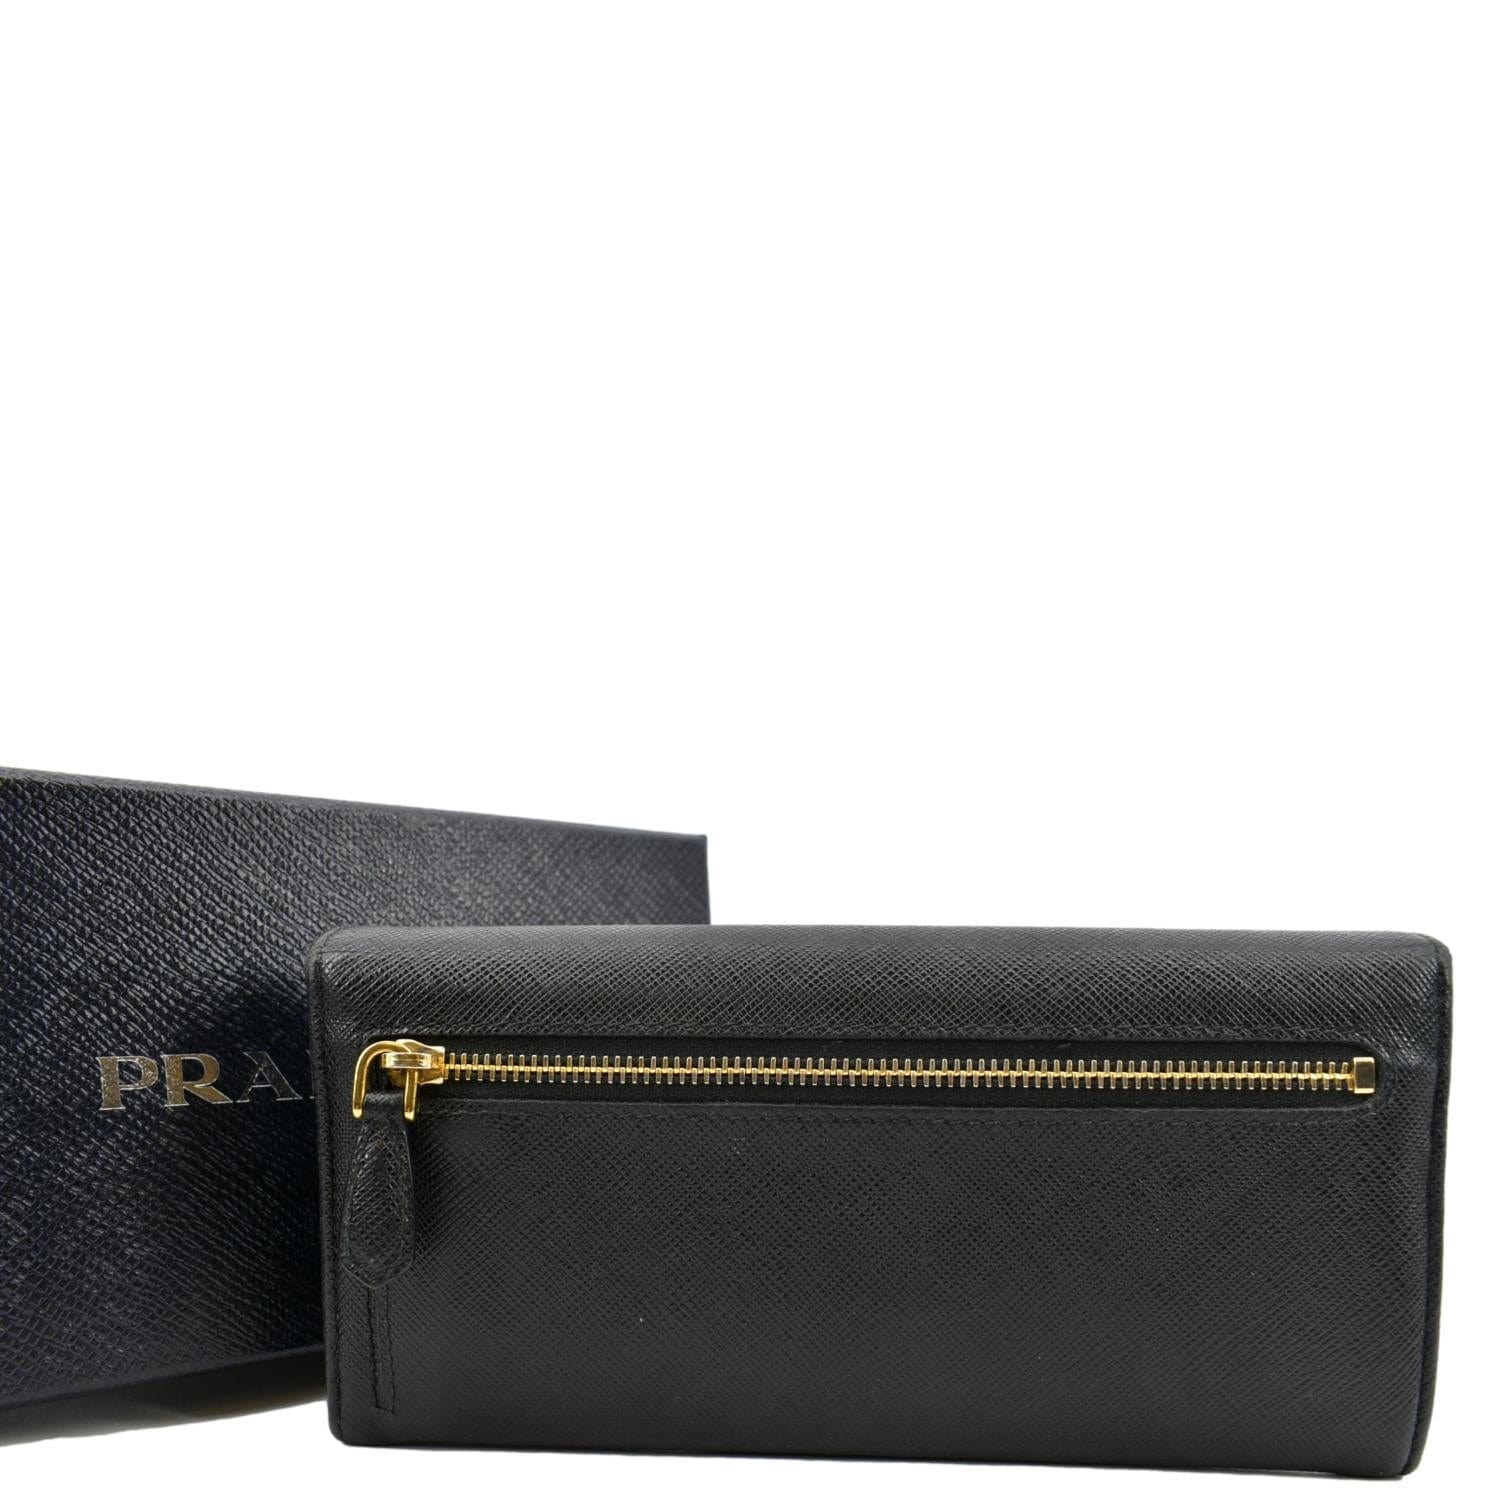 Prada Large Saffiano Leather Wallet With Bow - Farfetch